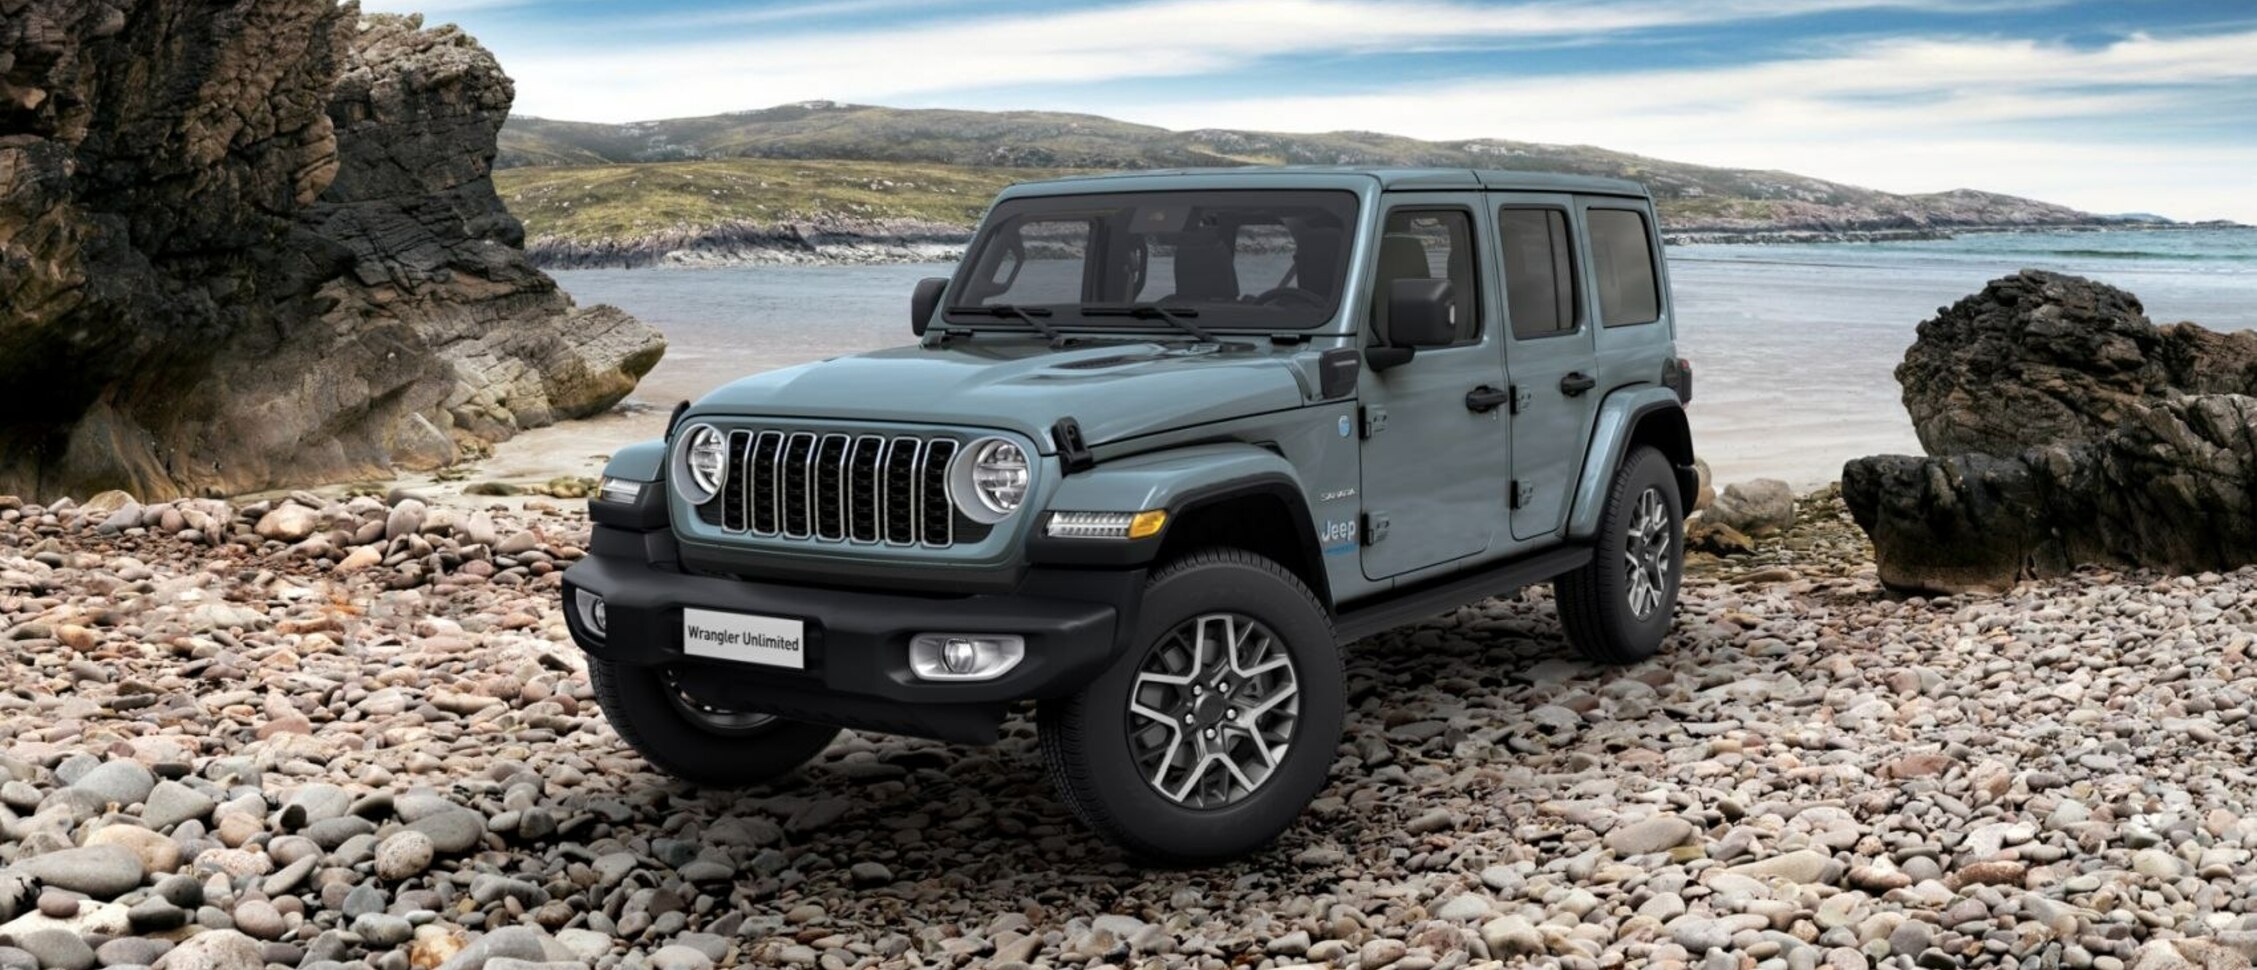 Jeep Wrangler IV Unlimited (JL, facelift 2023) Rubicon 2.0L (380 Hp) 4xe Plug-in Hybrid 4WD Automatic 2023